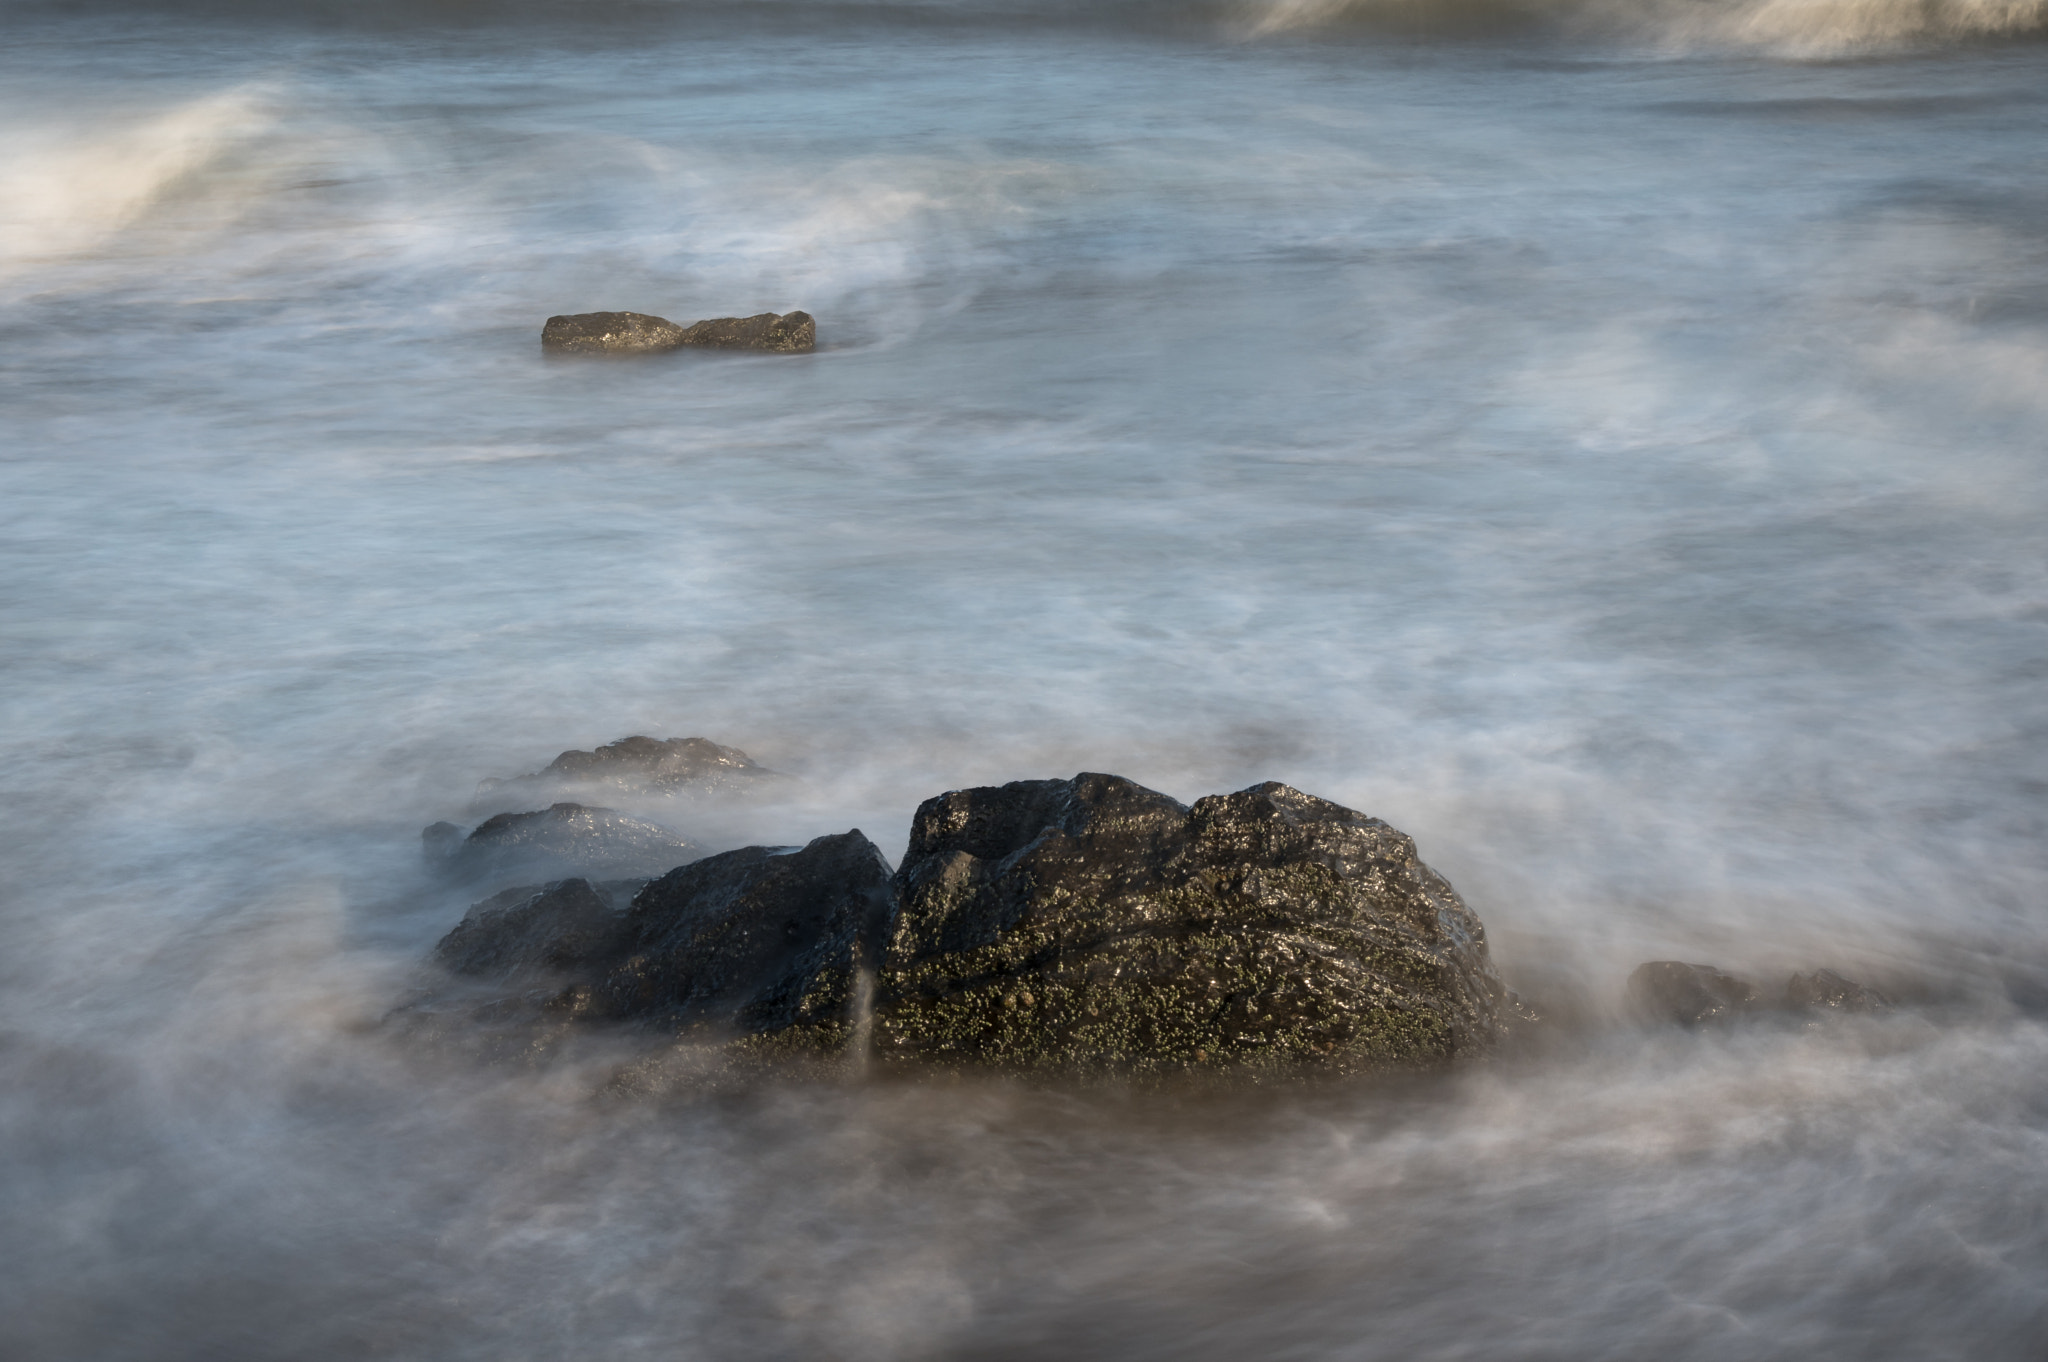 Pentax K-3 II sample photo. The rush of the tide photography